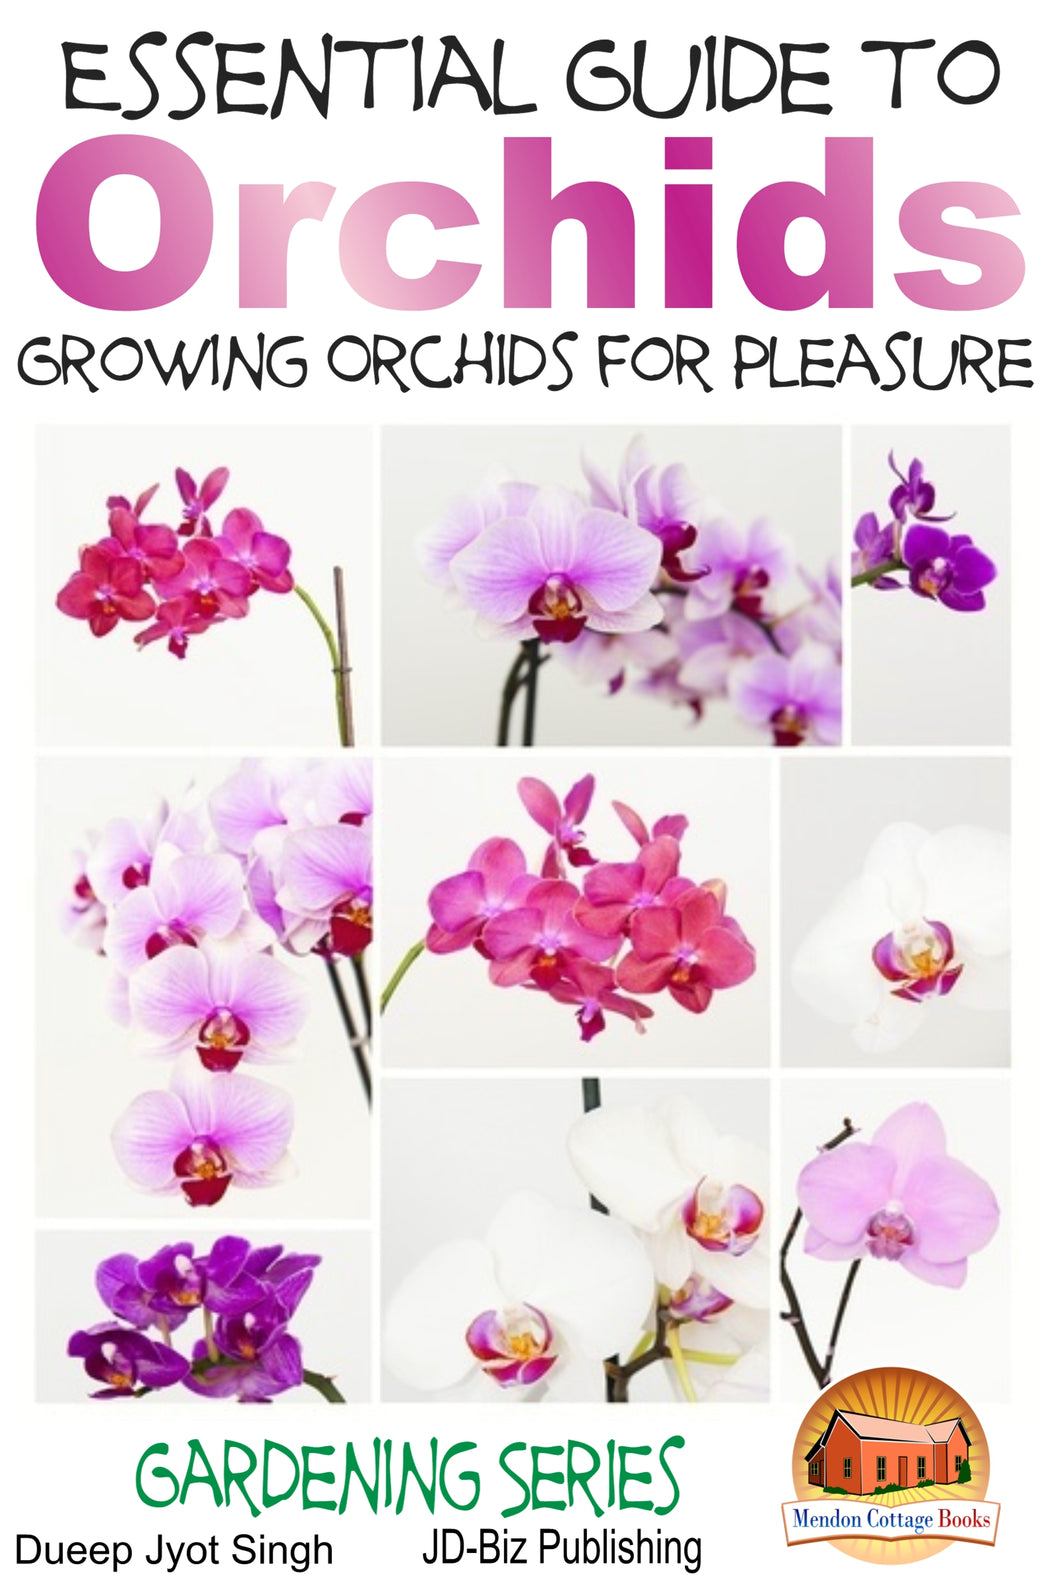 Essential Guide to Orchids